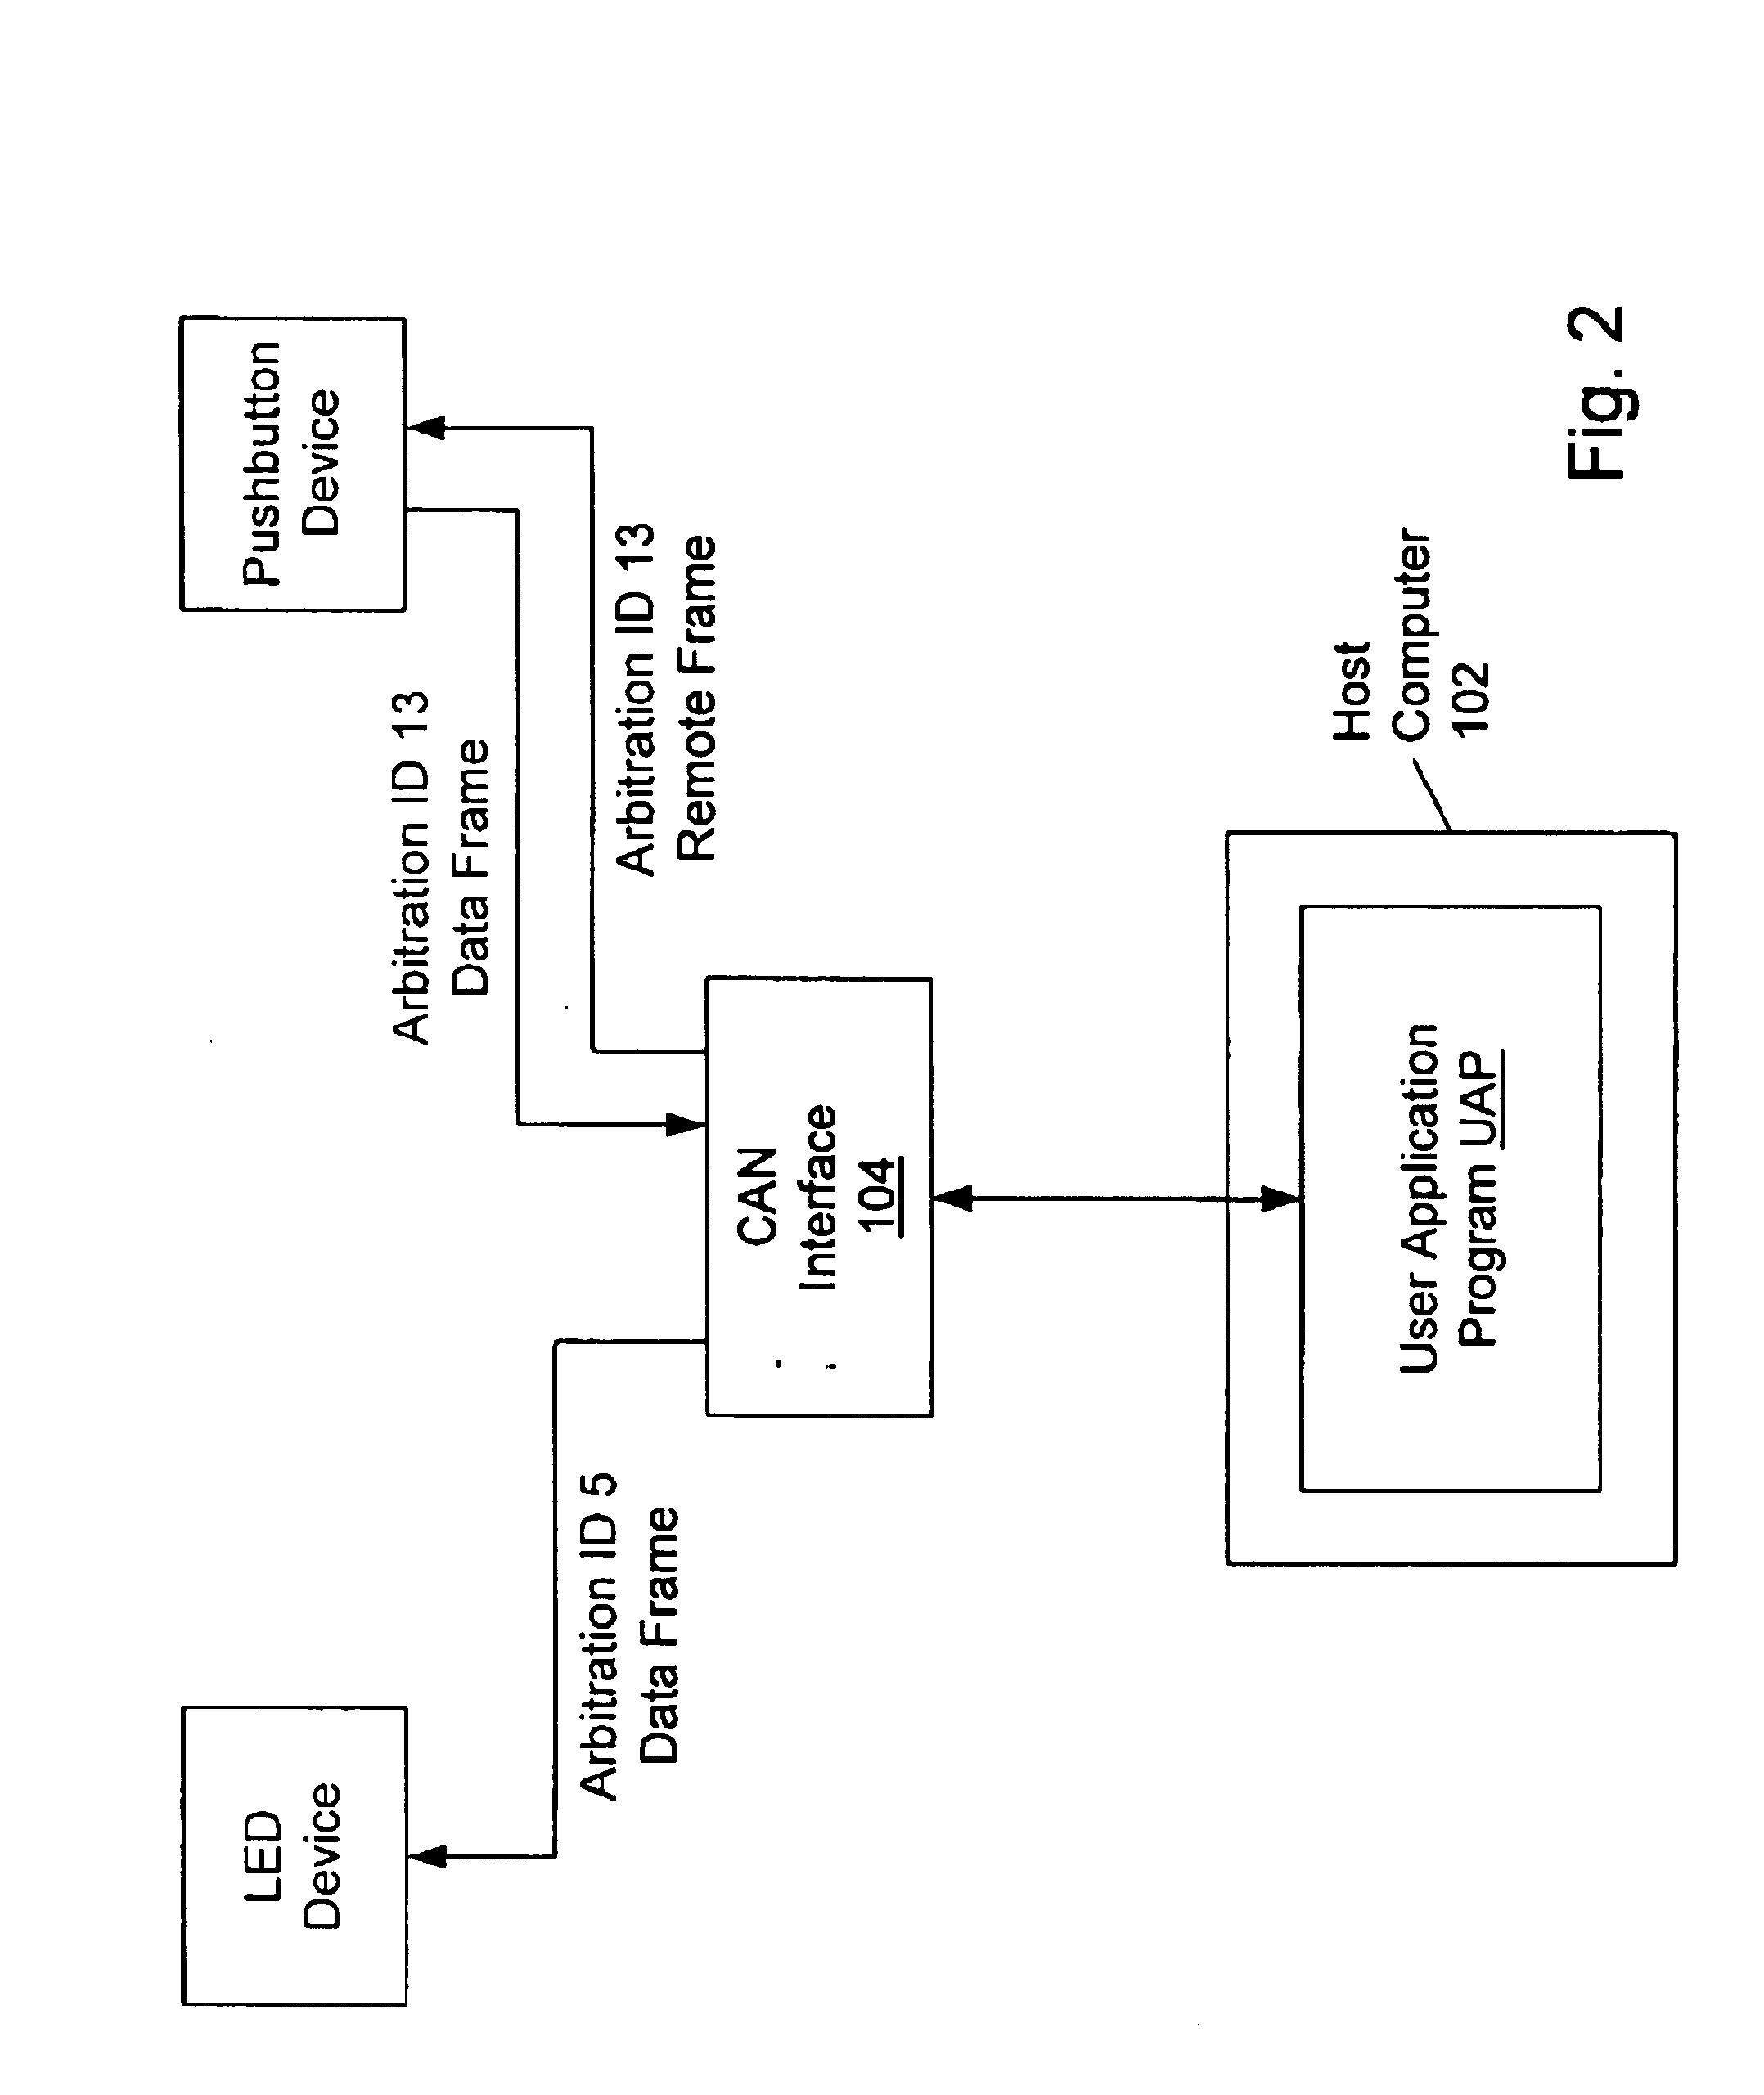 System and method for interfacing a CAN device and a peripheral device